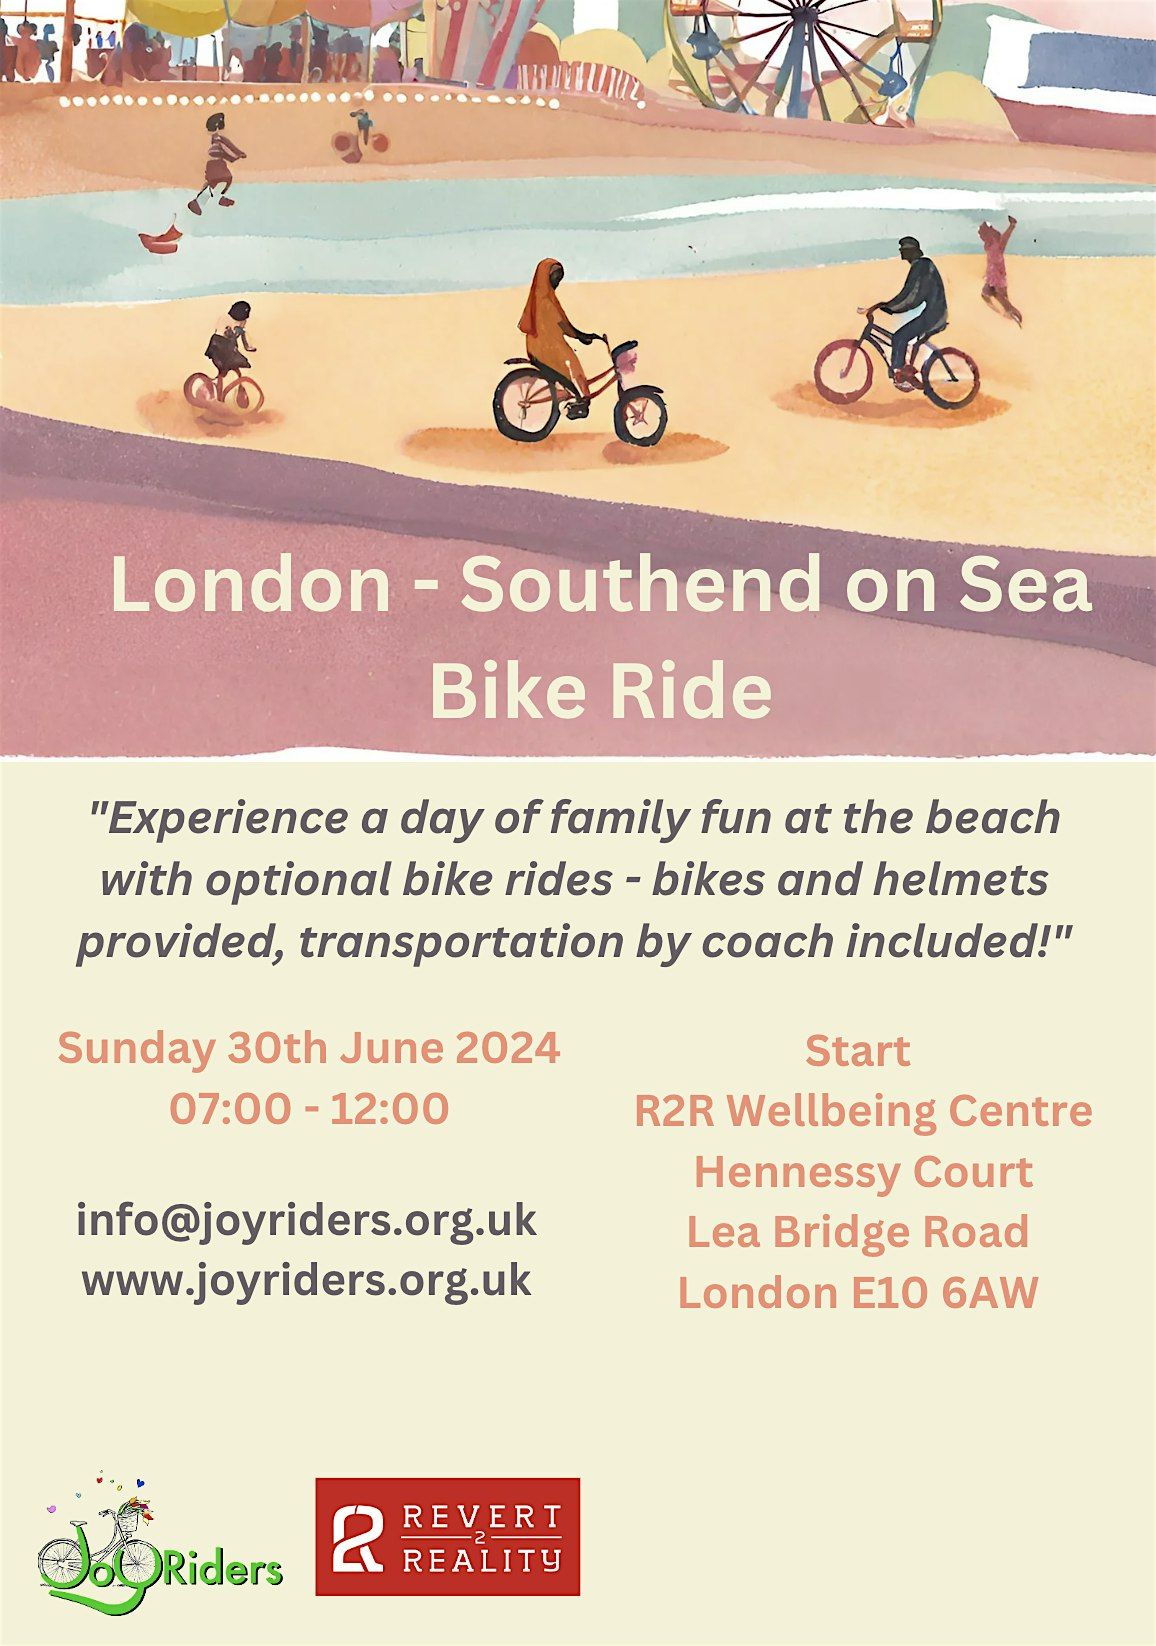 Advanced Ride R2R wellbeing centre (walthamstow) to Southend on Sea